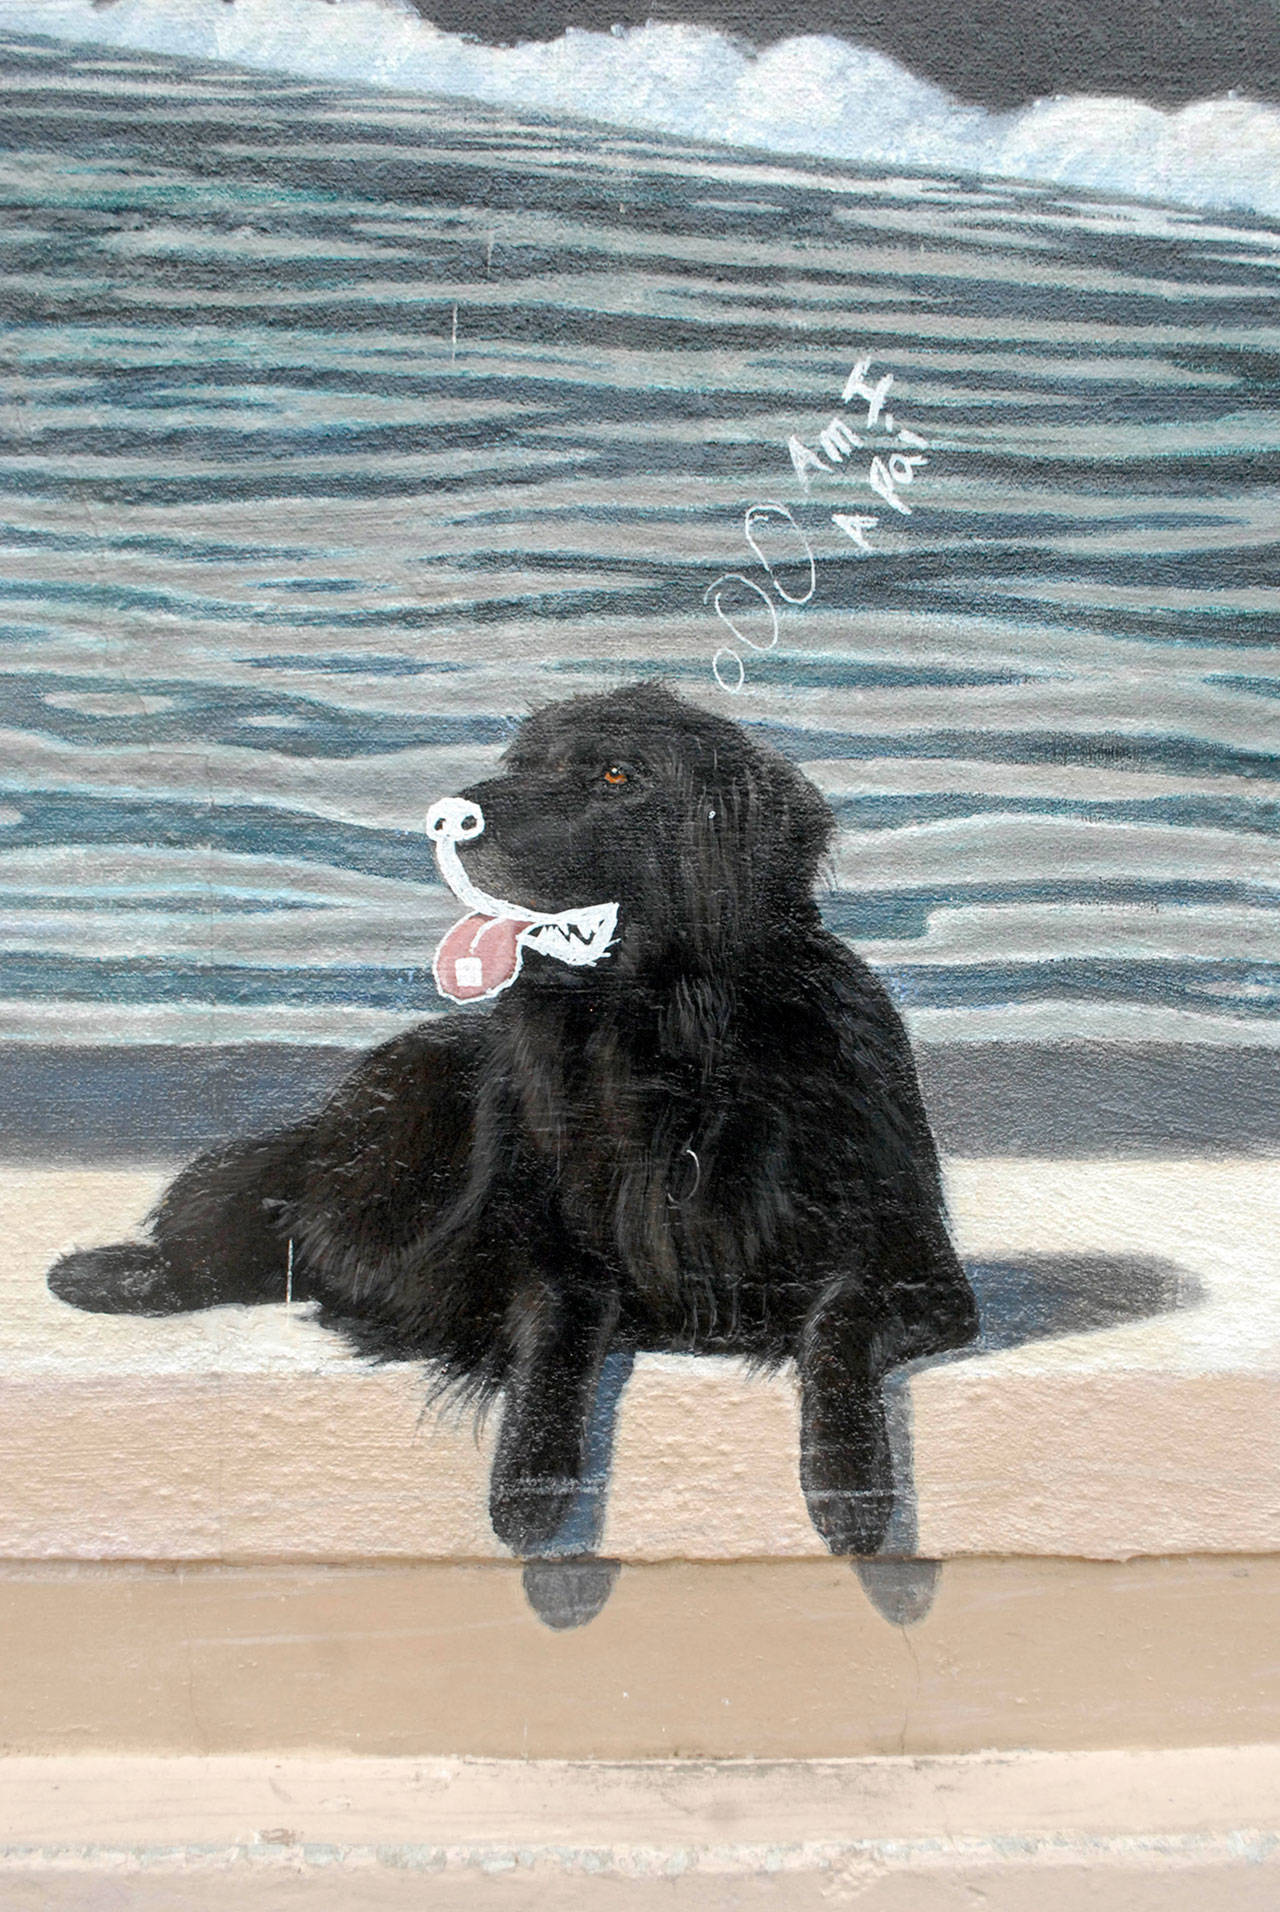 The three-dimensional dog in the Kalakala mural in downtown Port Angeles was vandalized earlier this month. (Keith Thorpe/Peninsula Daily News)